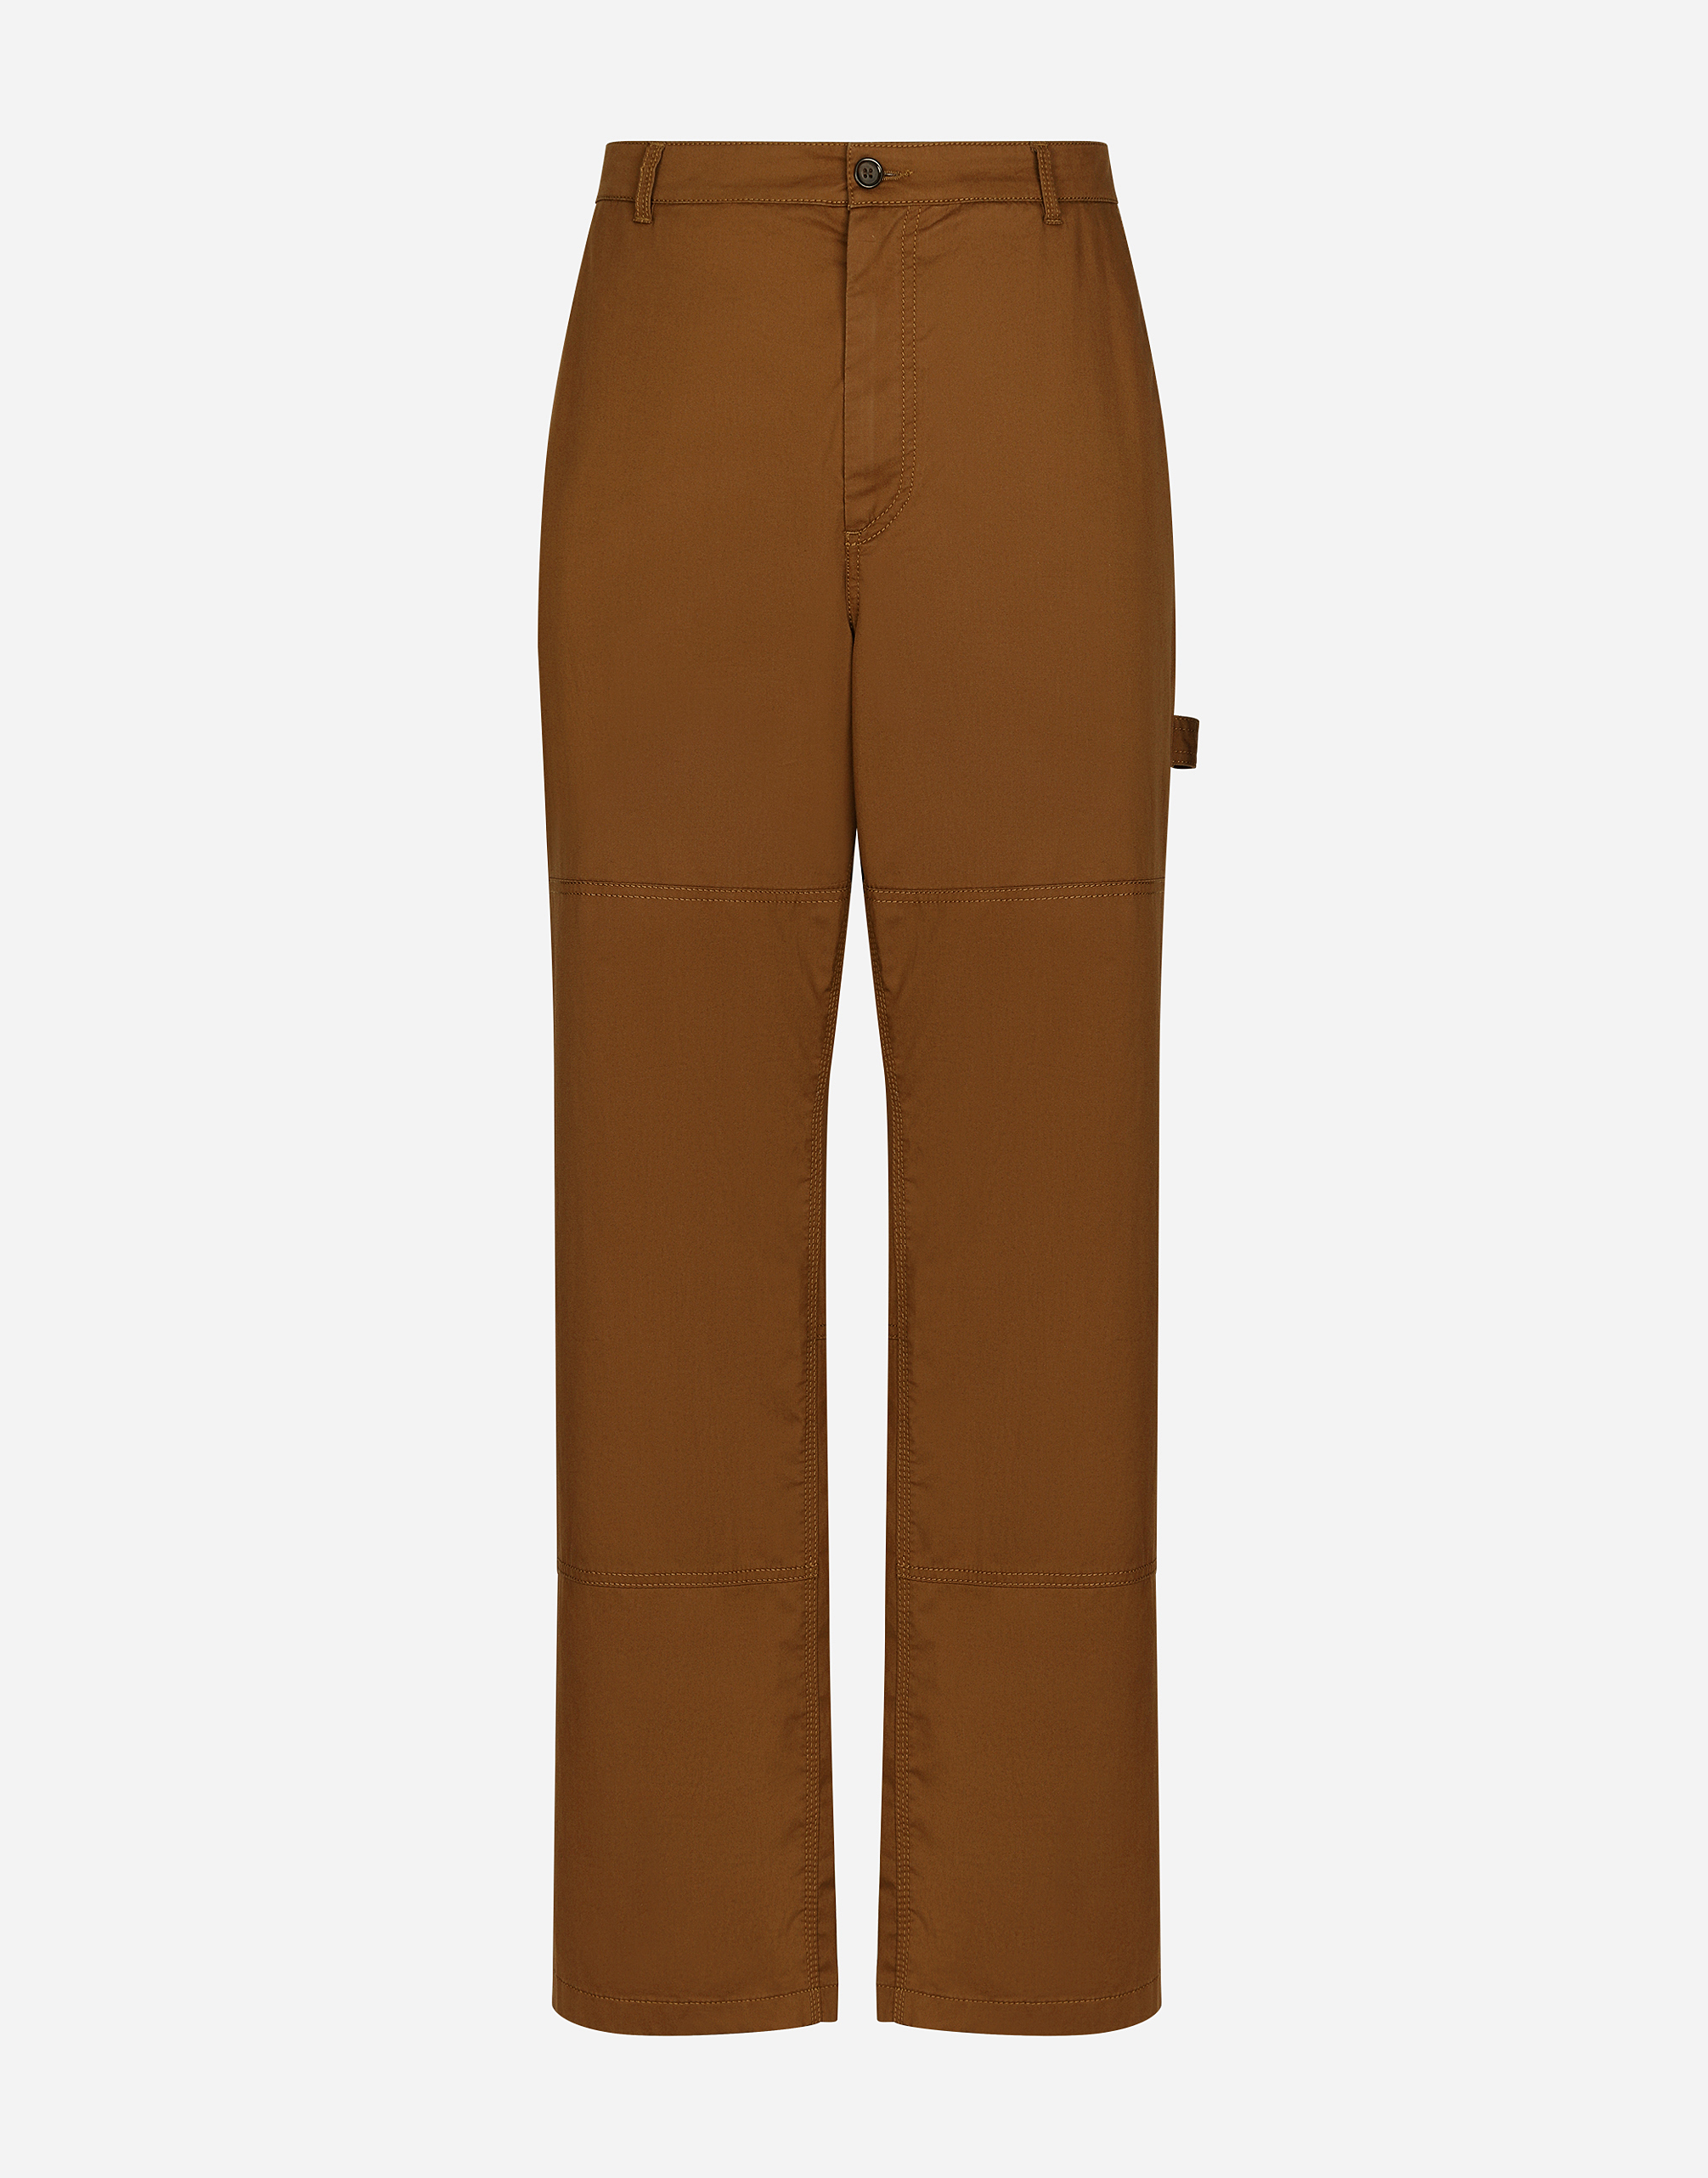 Dolce & Gabbana Stretch Cotton Worker Pants With Brand Plate In Brown